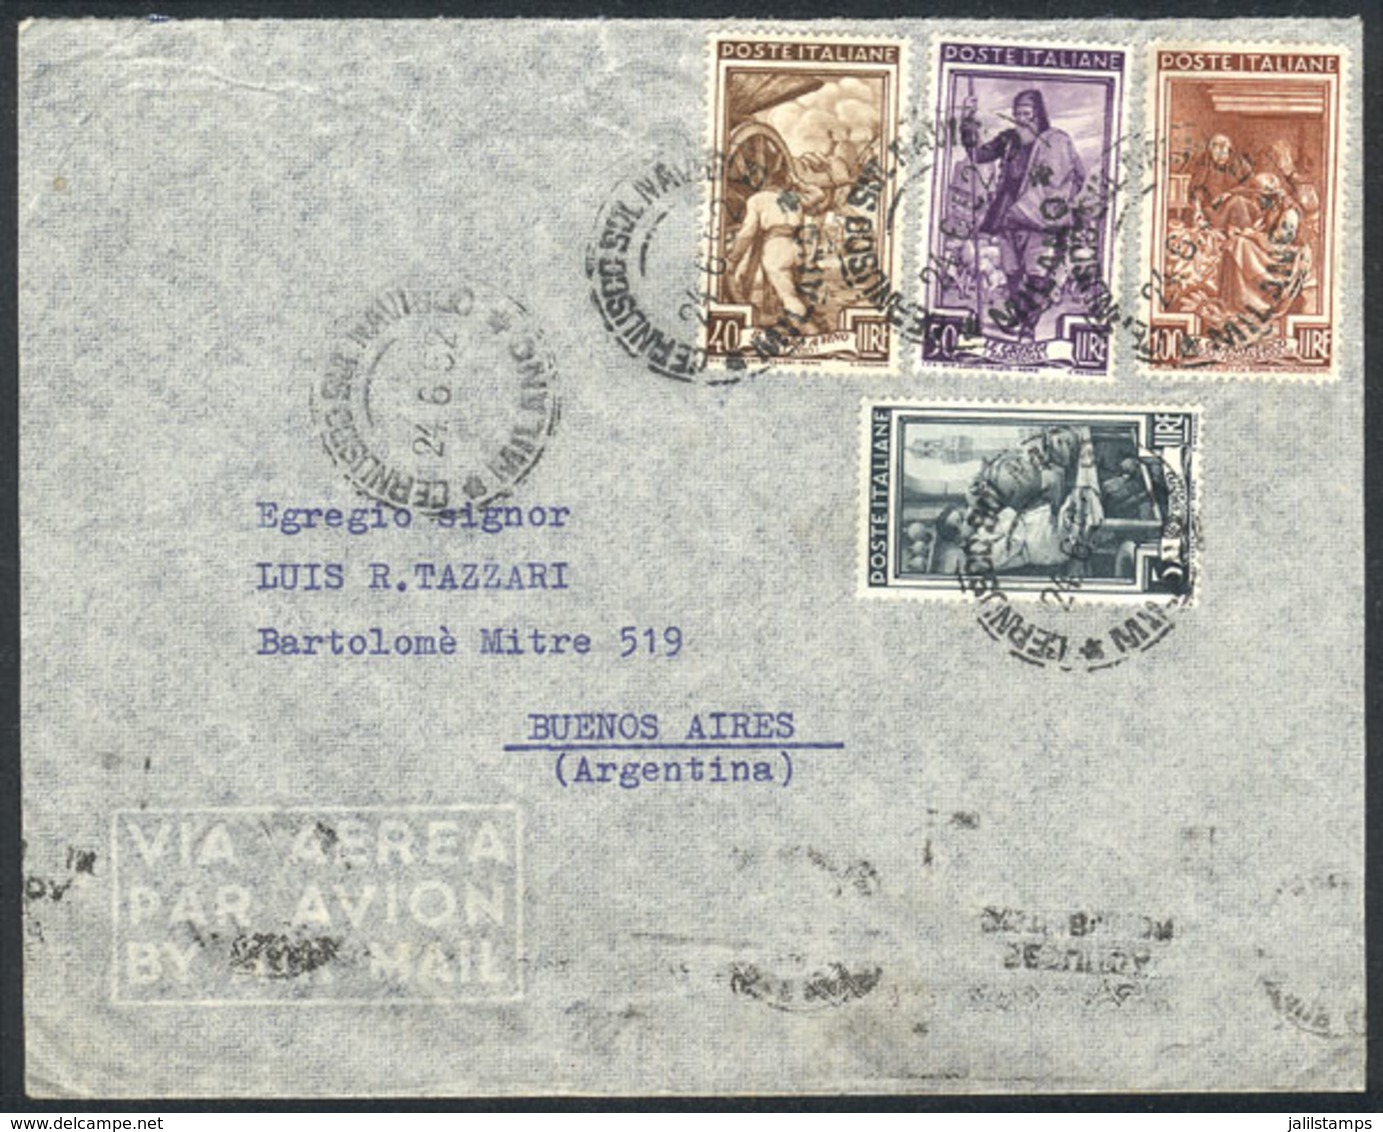 ITALY: Cover Franked By Sa.651 + Other Values (total 195L.), Sent From Cernusco To Argentina On 24/JUN/1952, Very Fine Q - Sin Clasificación